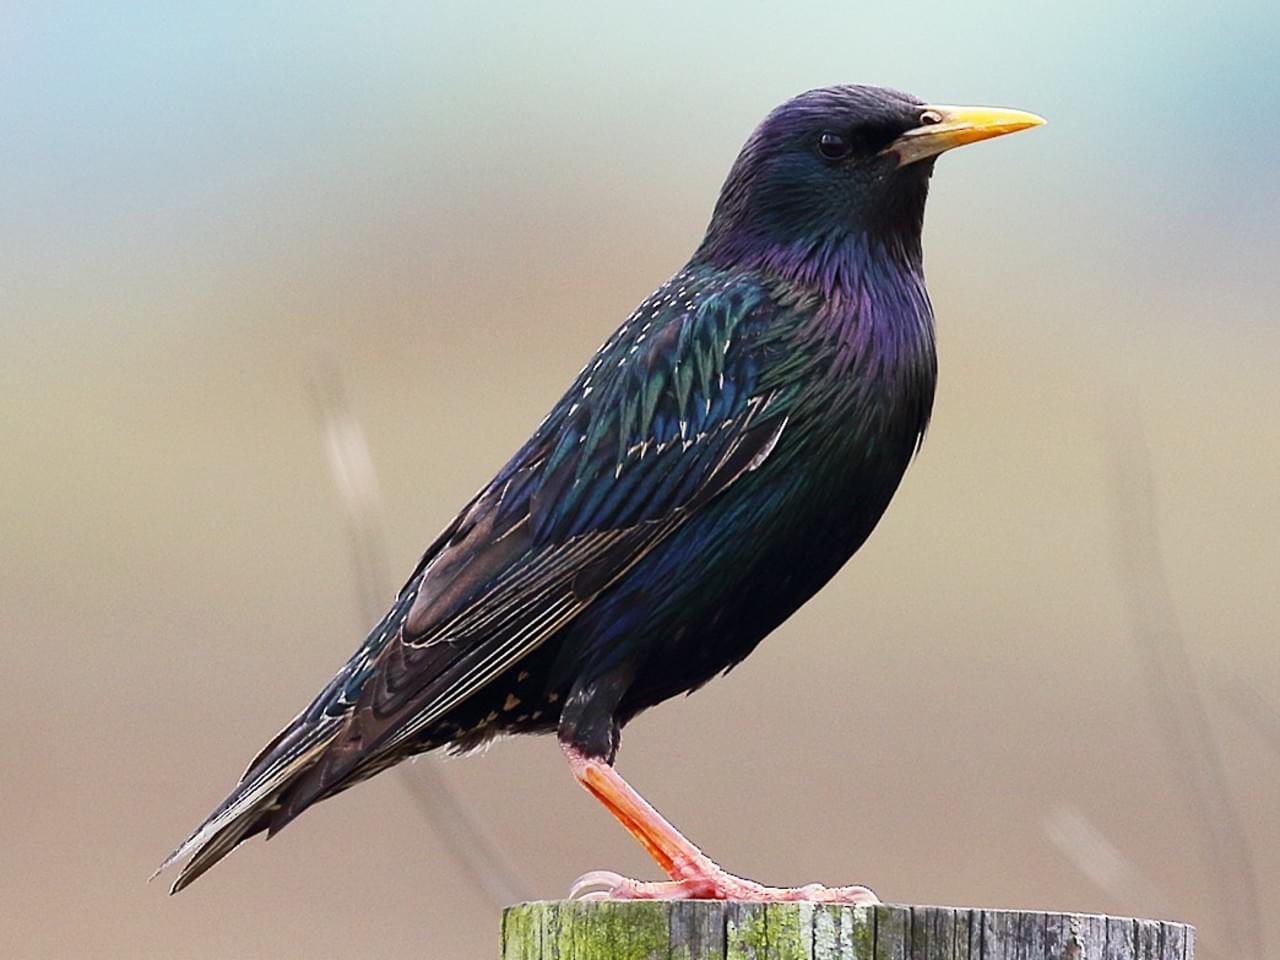 black bird with yellow bill, shiny green purple on chest and belly, black speckles on back, perching on post